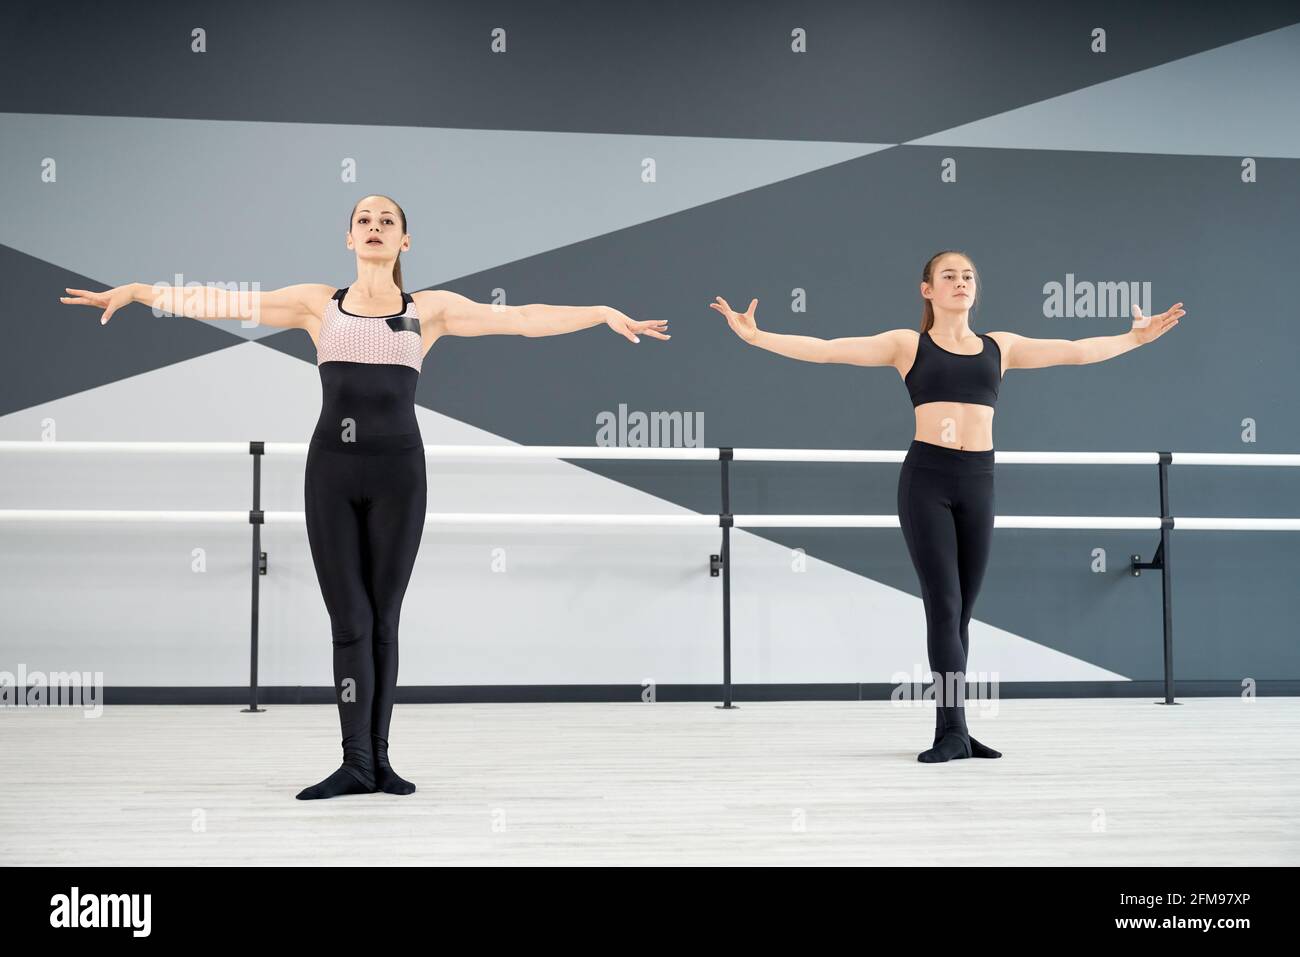 Adult female instructor helping young girl in black sportswear learn choreographic move. Two synchronized women practicing in hall, hi tech interior. Choreography, gymnastics concept. Stock Photo